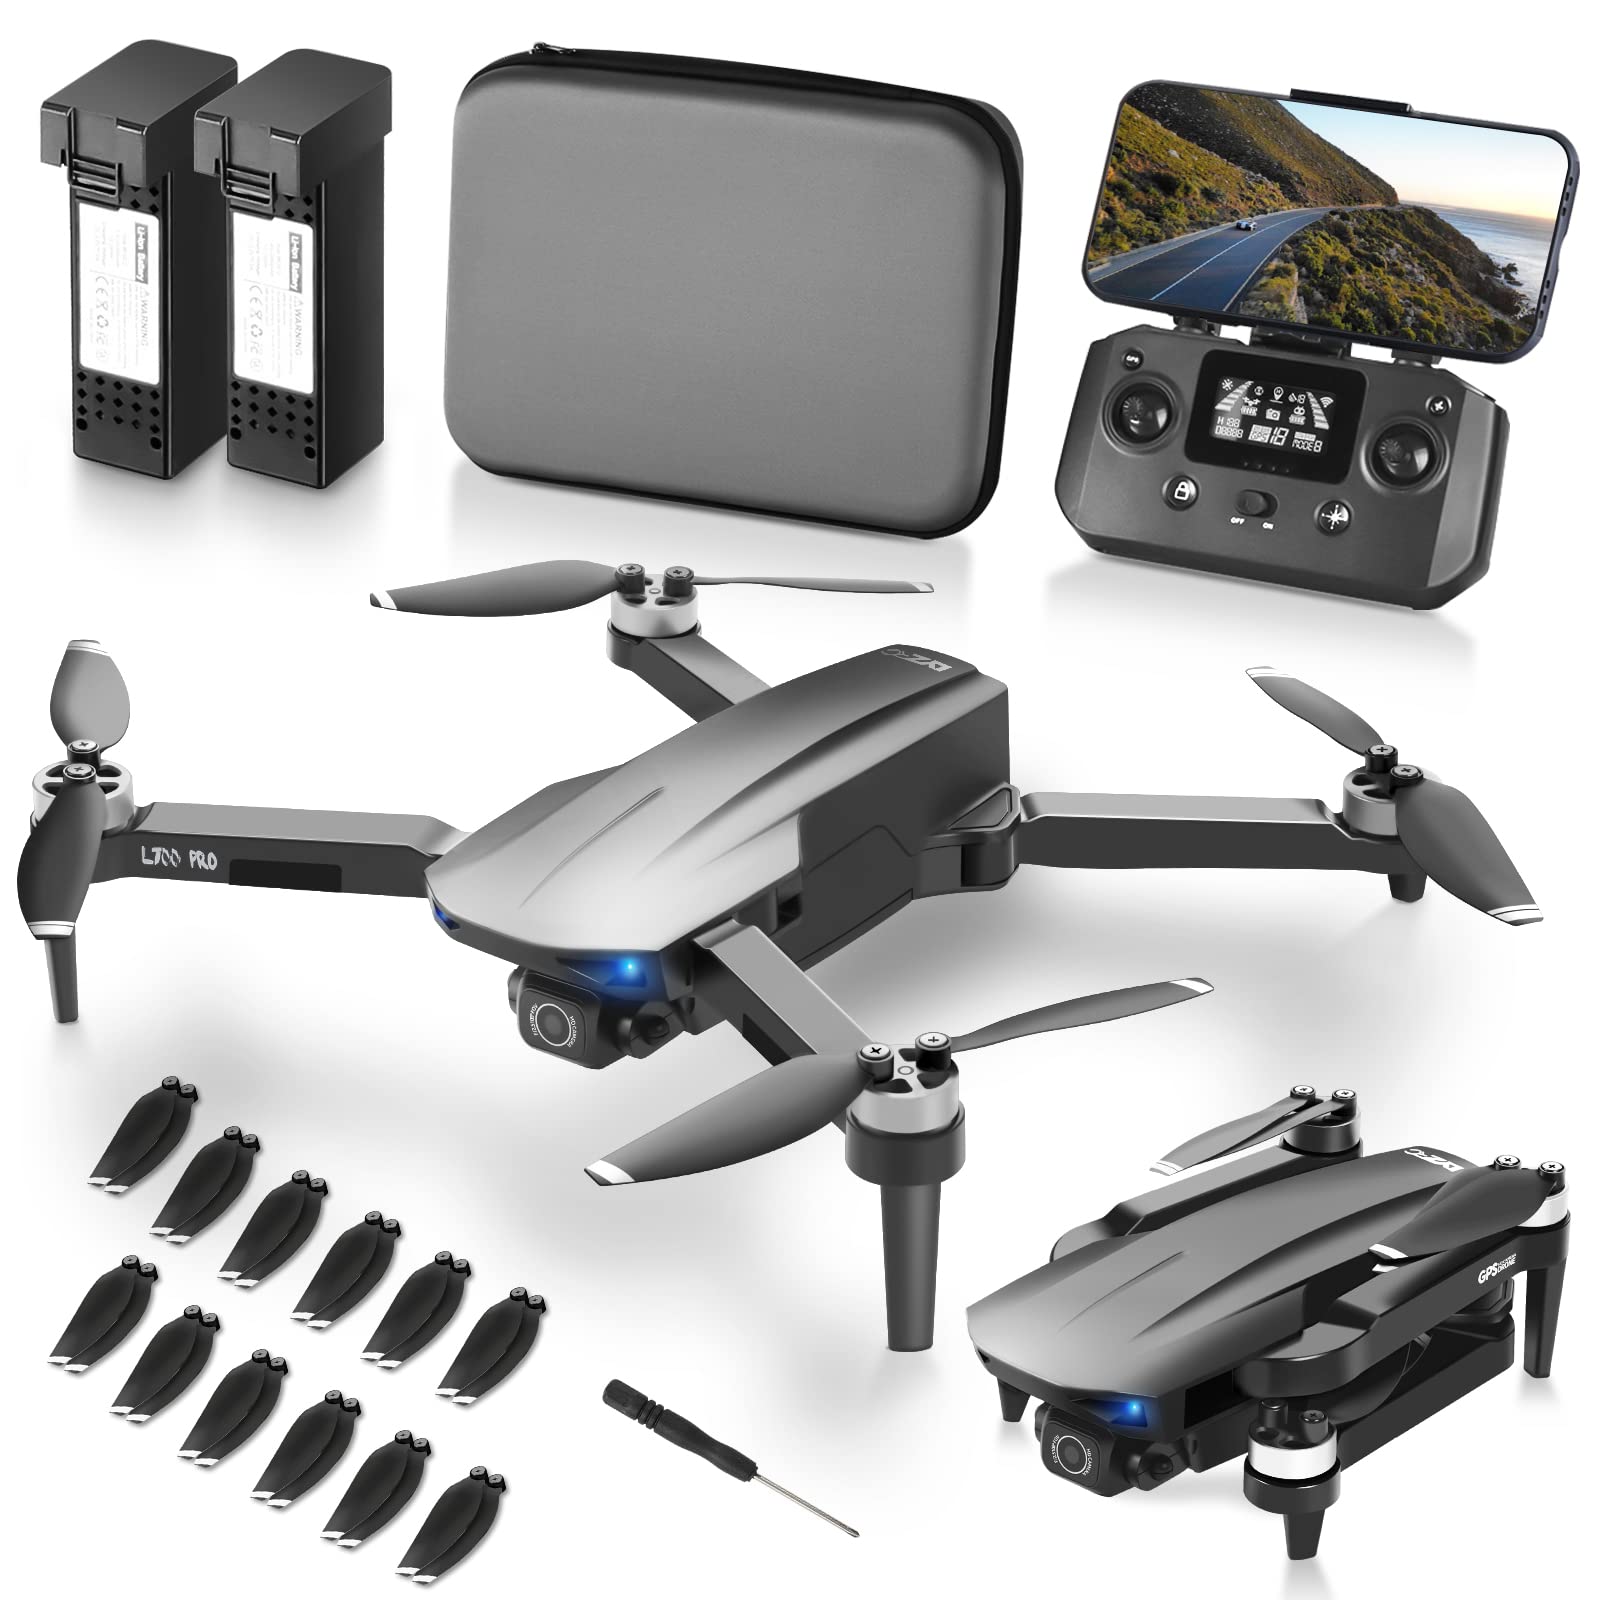 NMY N300 GPS Drones with Camera for Adults 4K, 3800ft Transmission, 40mins Flight Time on 2 Batteries, Brushless Motor, Mobile Phone Control, Multiple Flight Modes, Suitable for Beginners